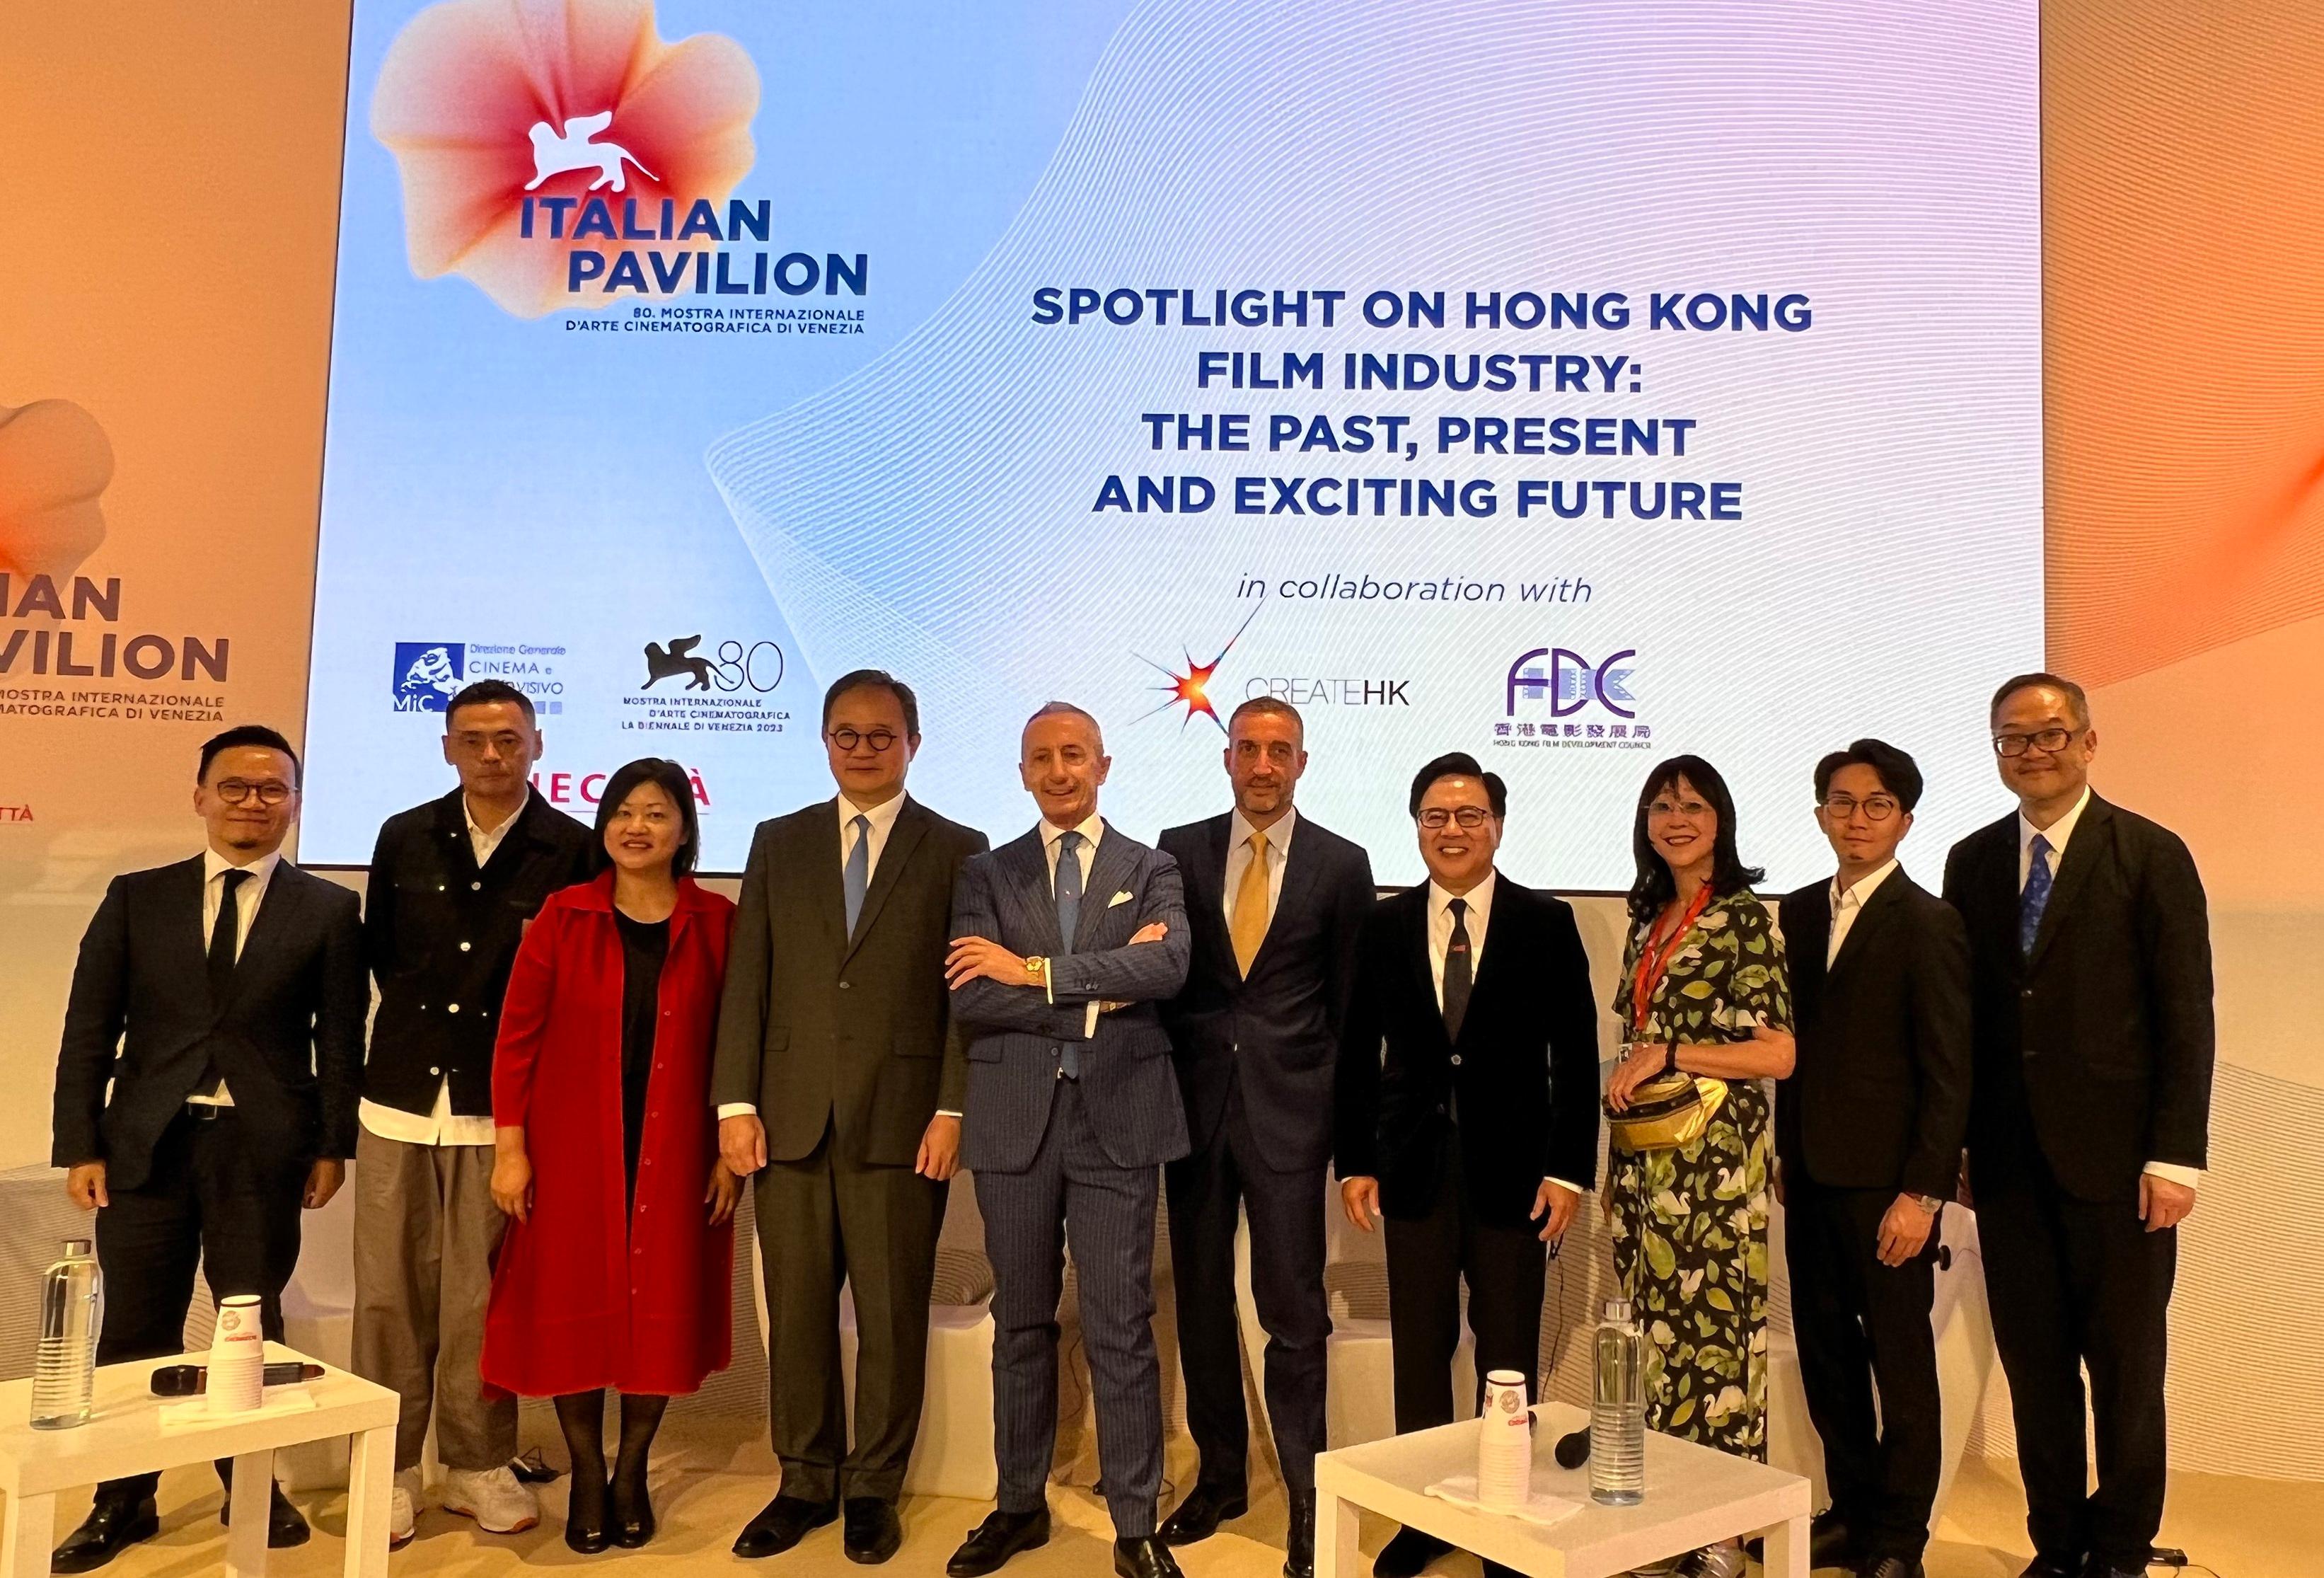 The Permanent Secretary for Culture, Sports and Tourism, Mr Joe Wong (fourth left); the Head of Create Hong Kong, Mr Victor Tsang (first right); the Assistant Head of Create Hong Kong and Secretary-General of the Hong Kong Film Development Council, Mr Gary Mak (first left); the Chairman of the Hong Kong Film Development Council, Dr Wilfred Wong (fourth right); the Head of Special Projects, Directorate General for Cinema and Audiovisual-Ministry of Culture of the Government of Italy, Mr Roberto Stabile (fifth left), and Hong Kong directors participated in a special panel discussion entitled “Spotlight on Hong Kong Film Industry: The Past, Present and Exciting Future” on September 2 (Venice time).